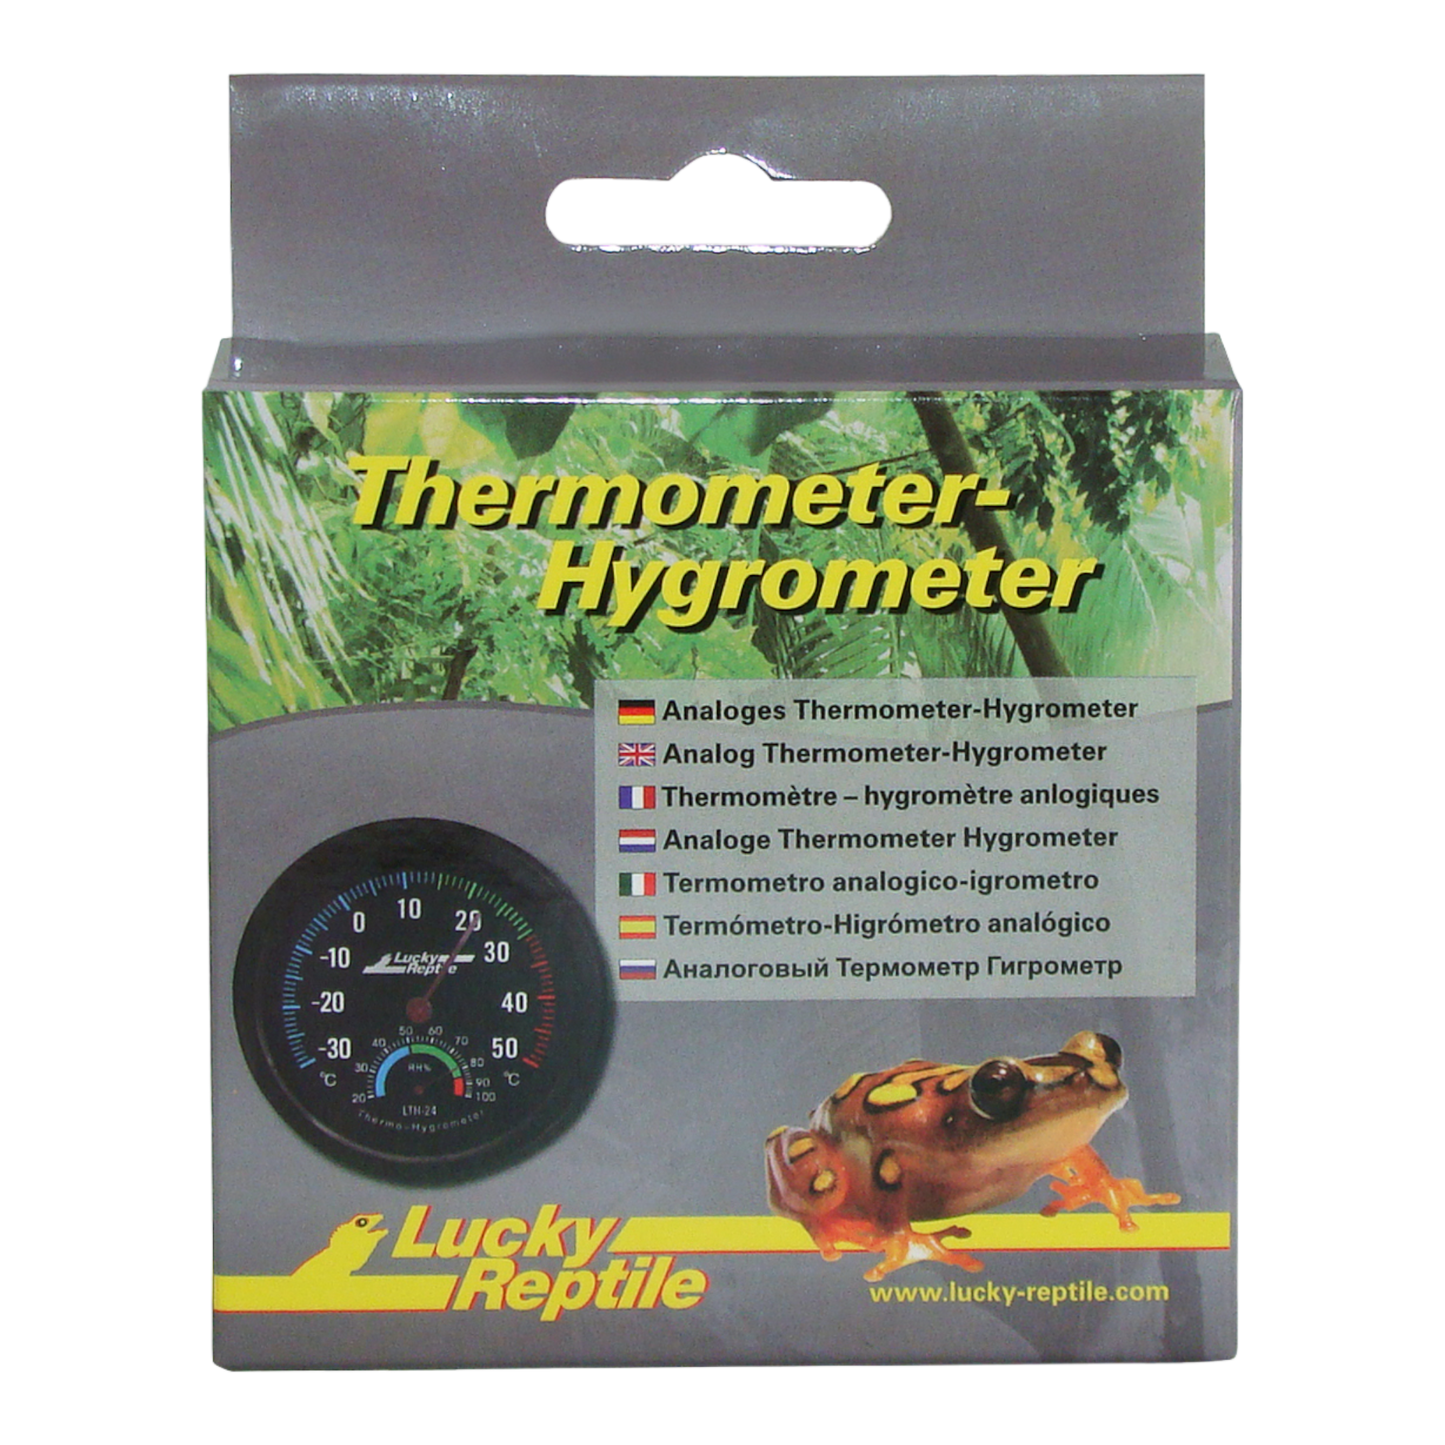 LUCKY REPTILE THERMOMETER - HYGROMETER